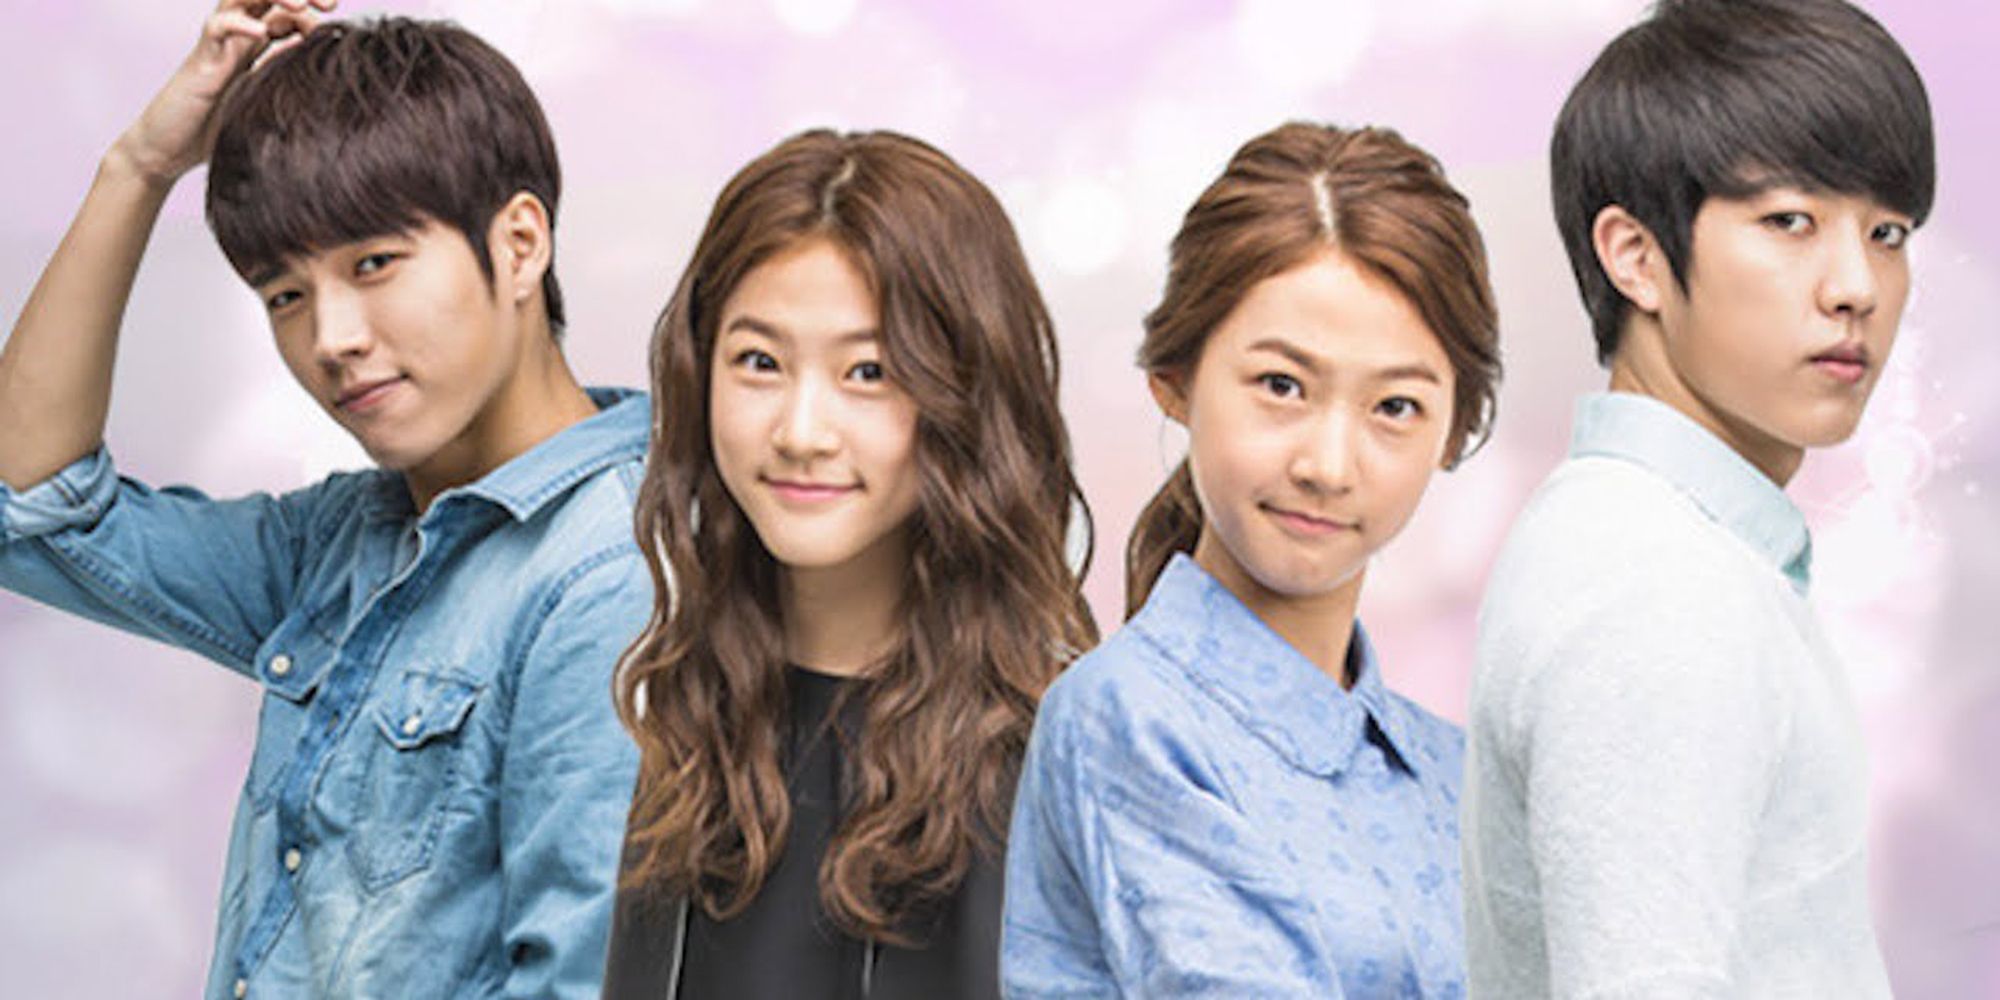 Cast of Hi! School Love On in the poster smiling and looking at the camera.